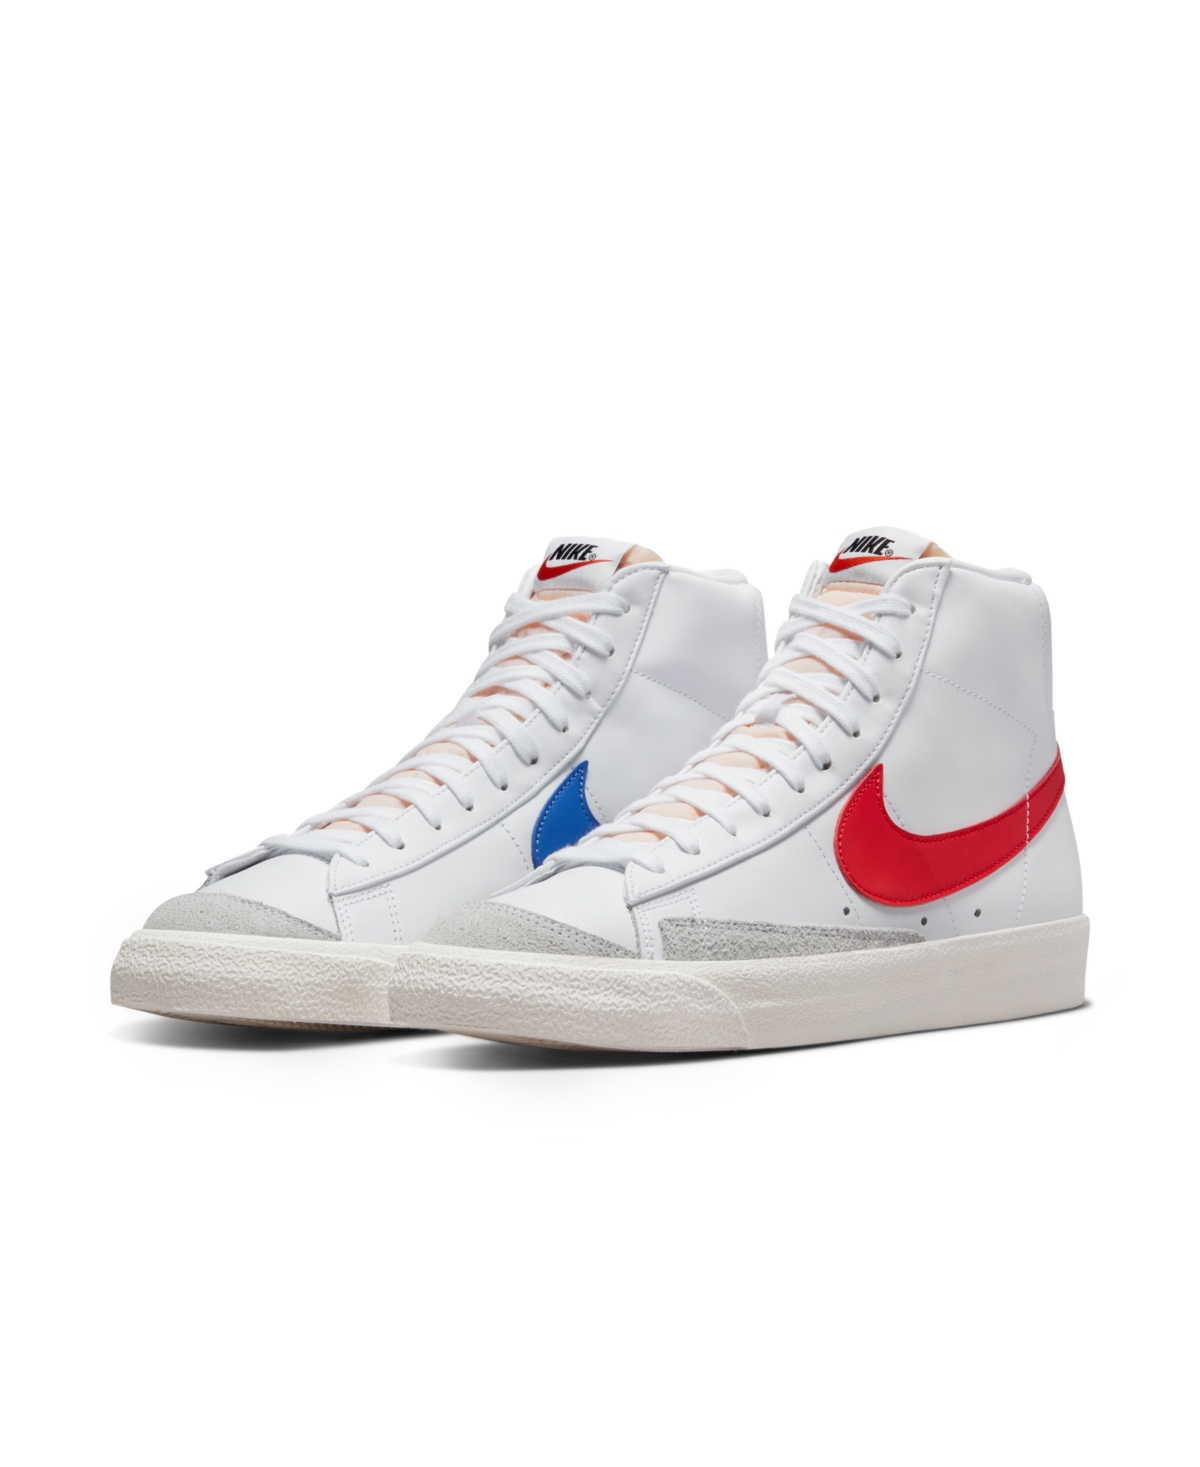 Nike Men's Blazer Mid 77's Vintage-Like Casual Sneakers from Finish Line